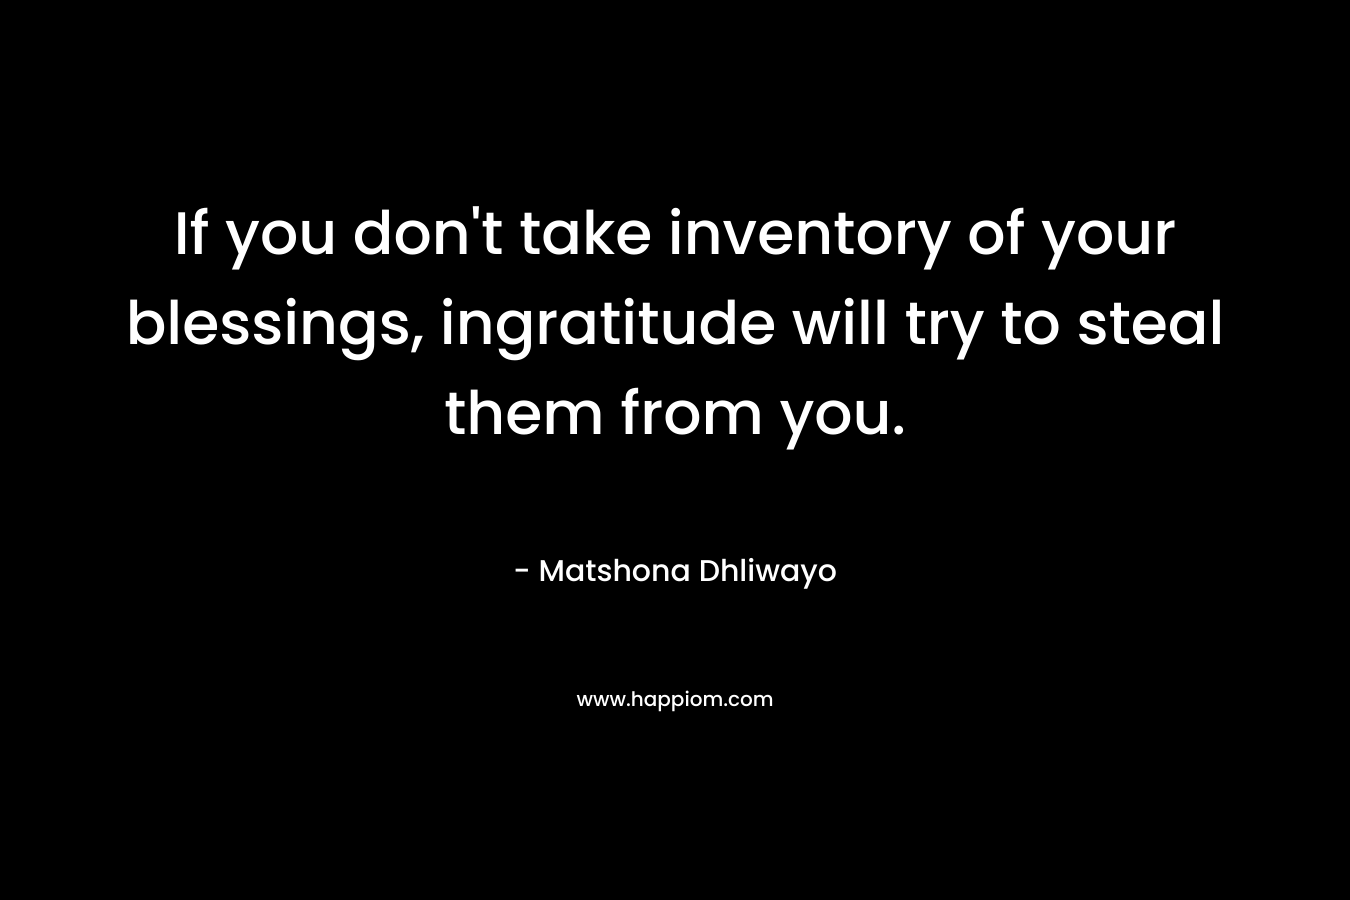 If you don’t take inventory of your blessings, ingratitude will try to steal them from you. – Matshona Dhliwayo